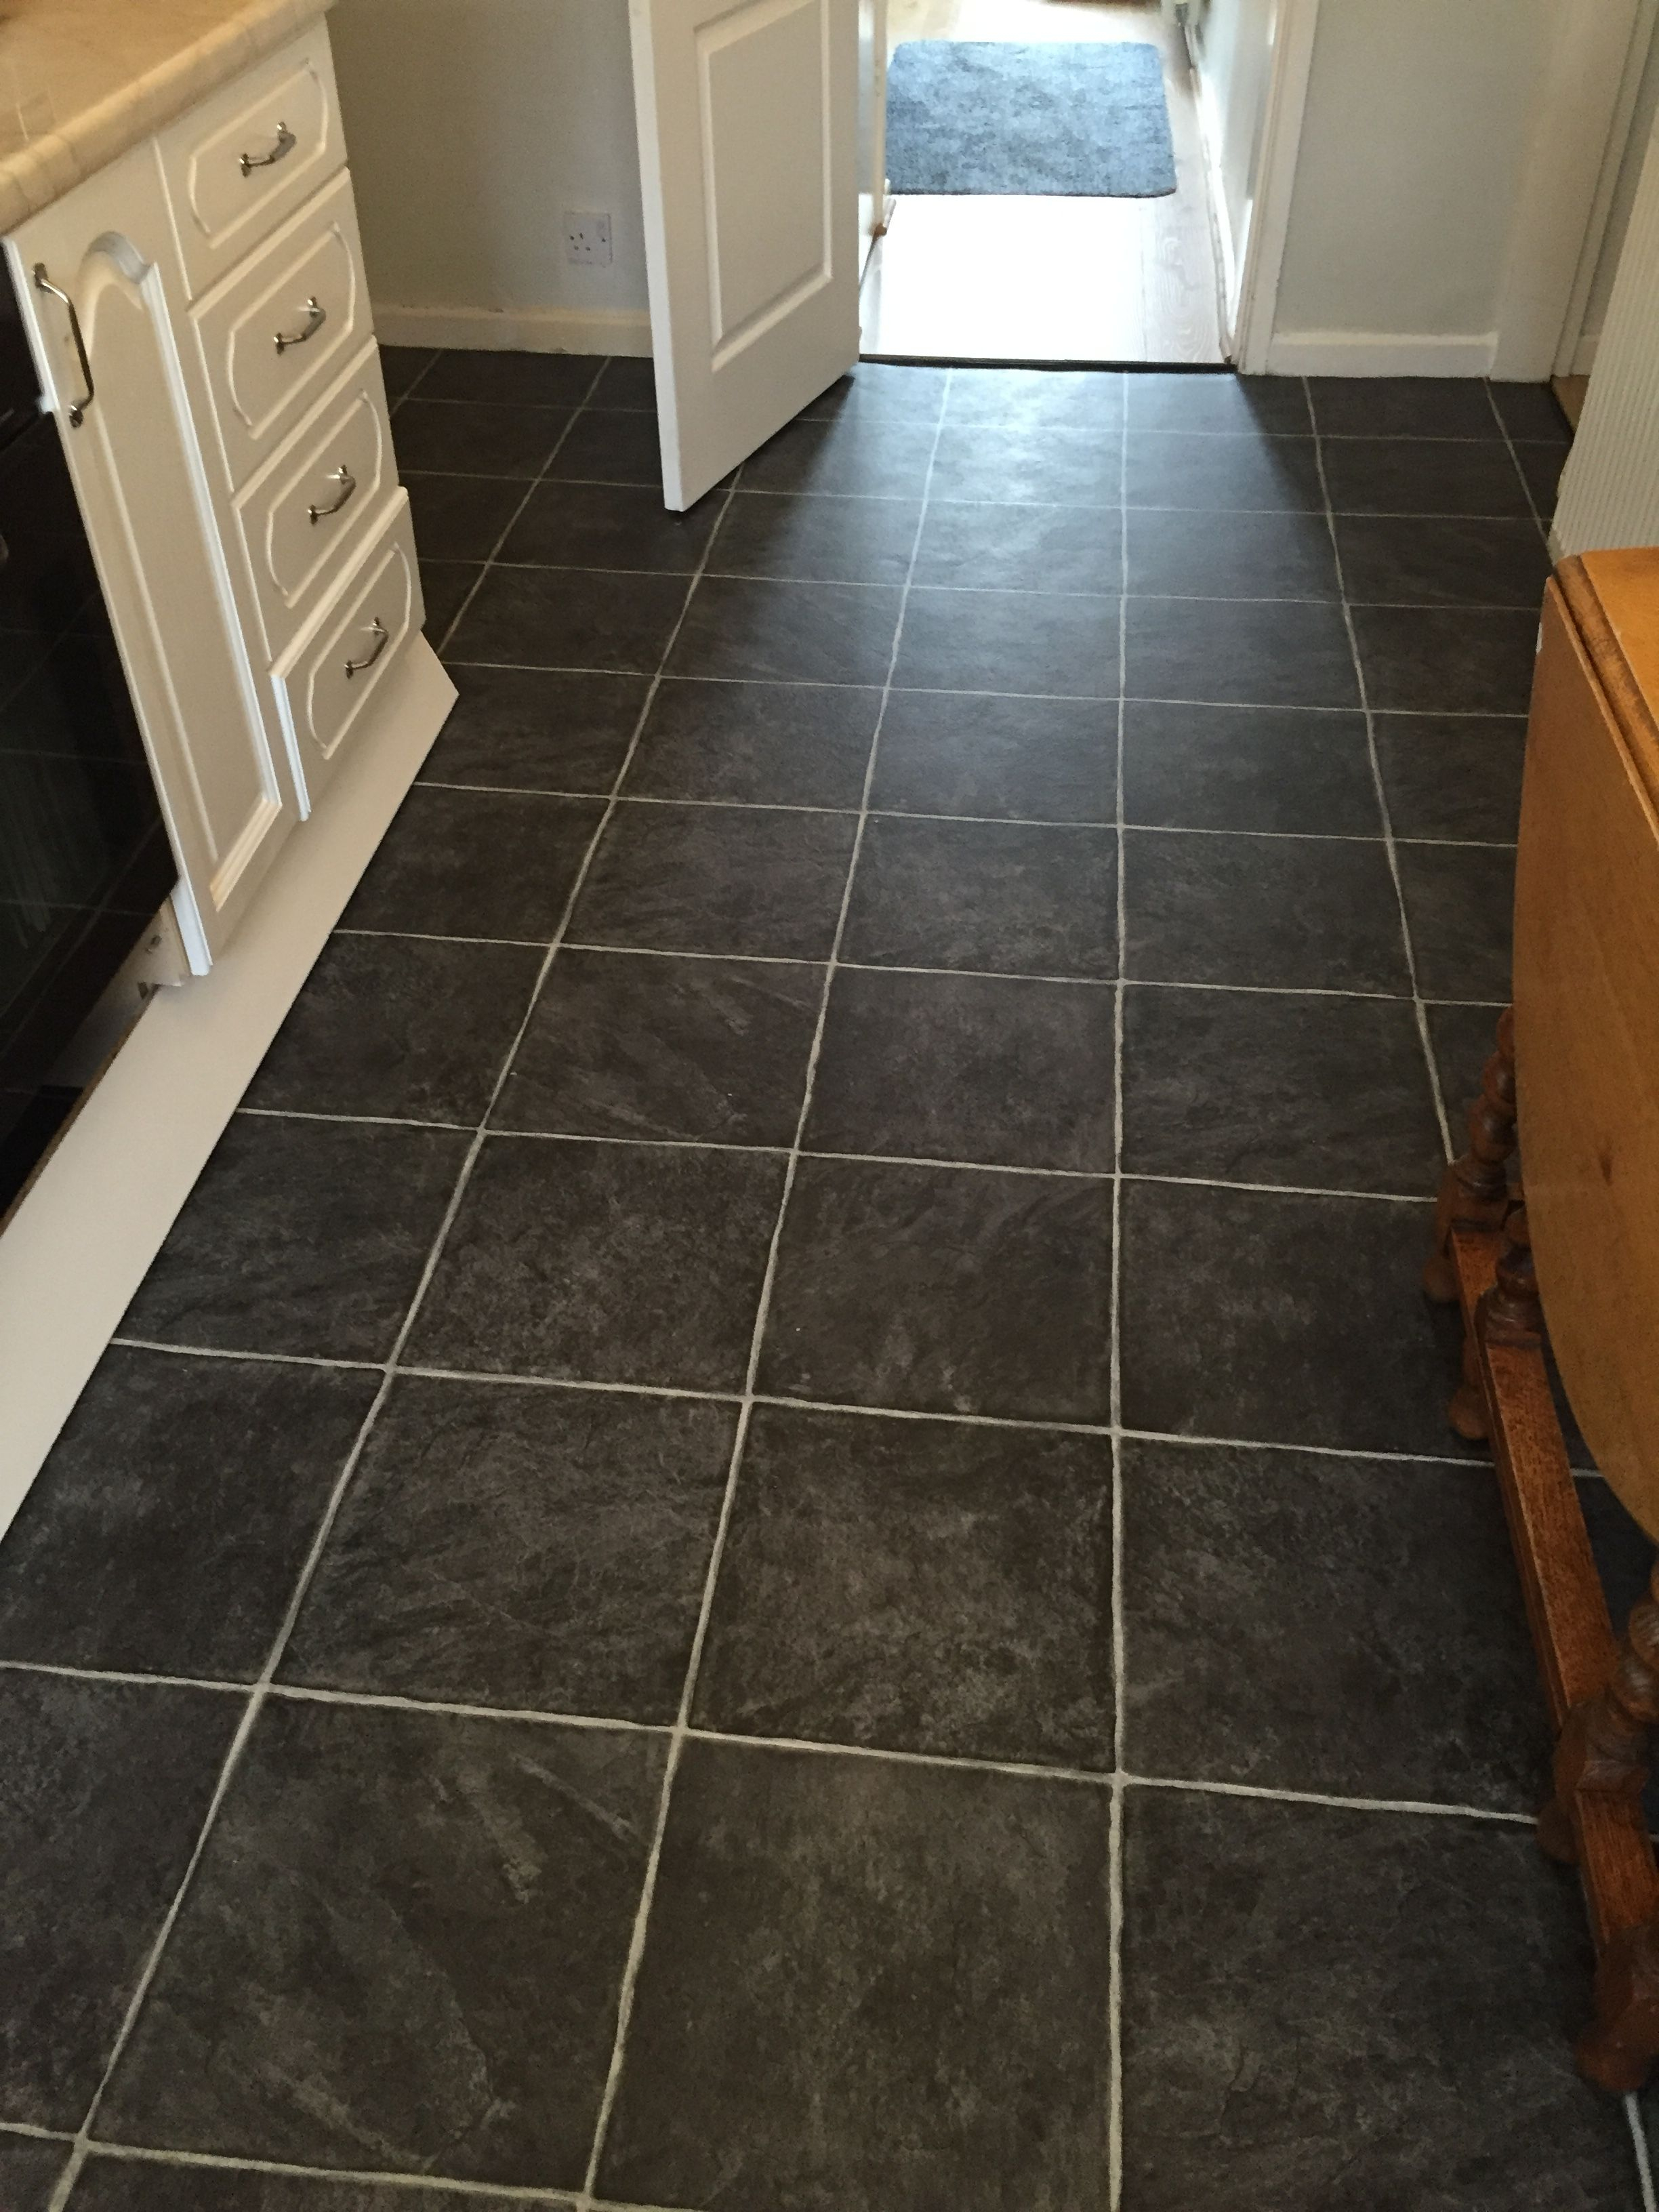 Vinyl Flooring Is Easy To Clean And Ideal For Kitchens in sizing 2448 X 3264